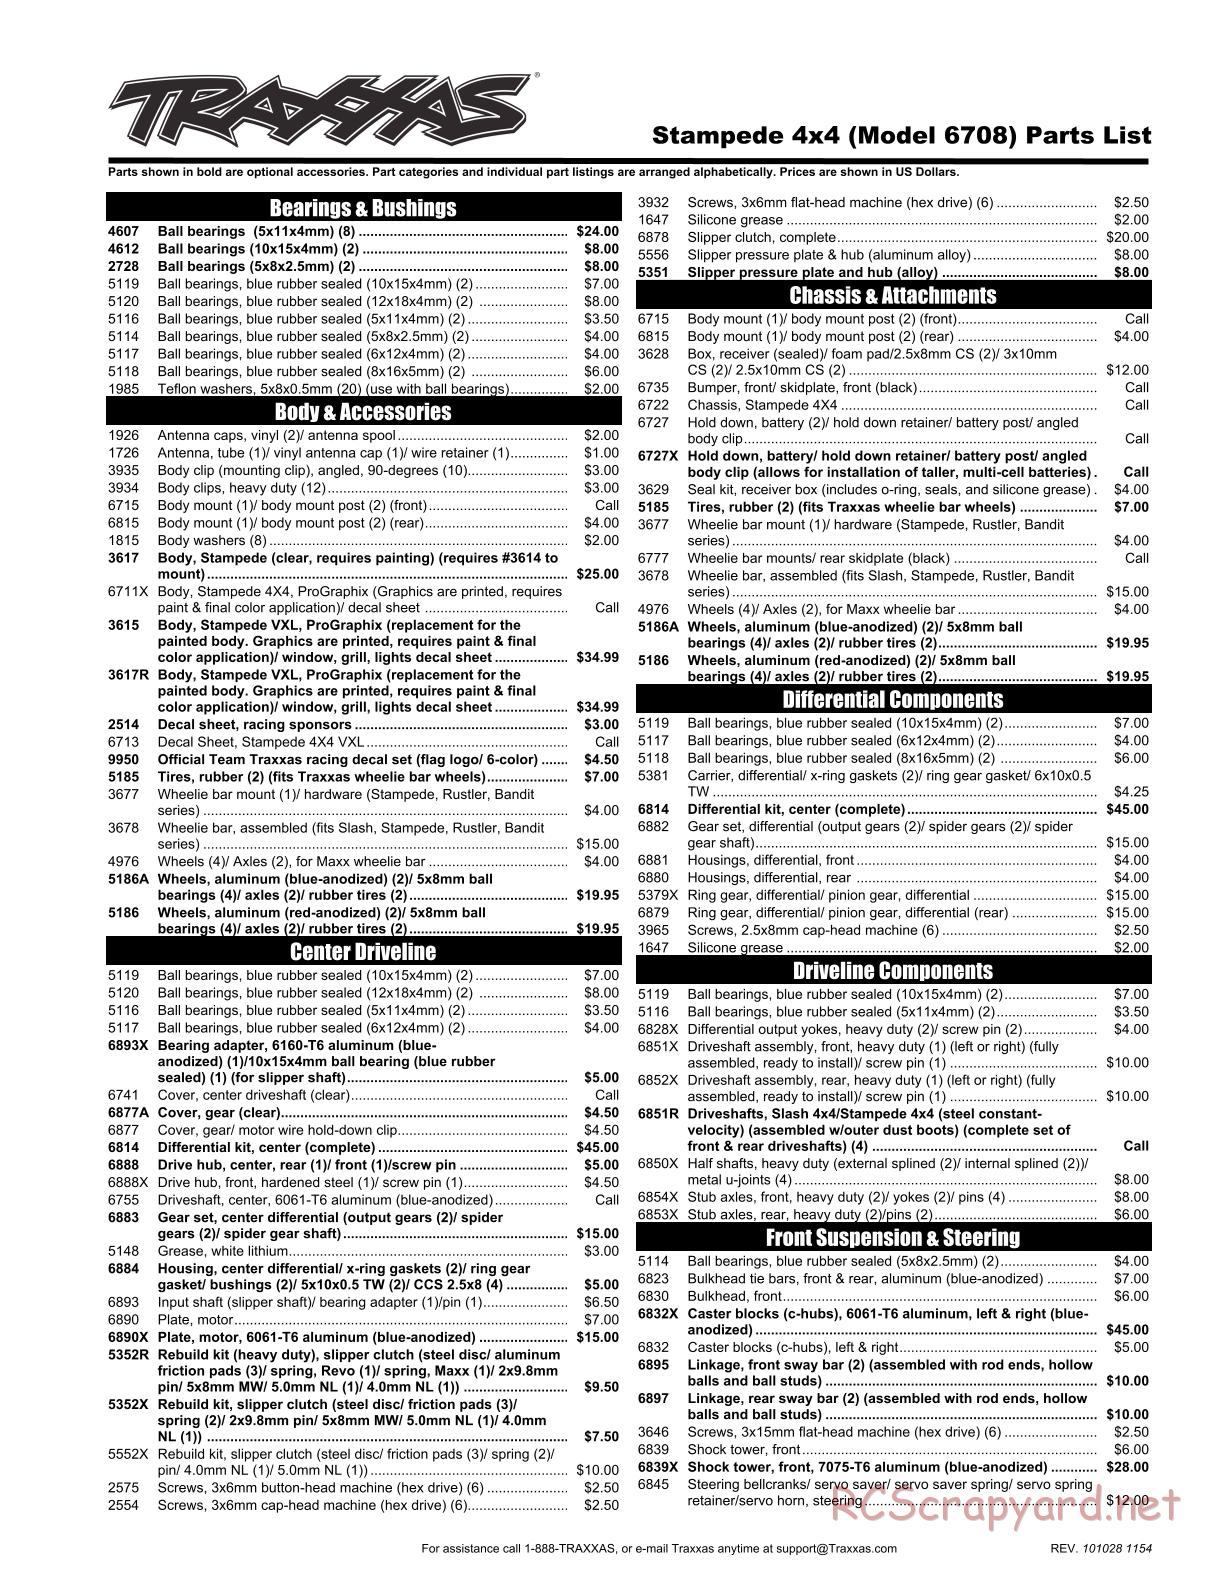 Traxxas - Stampede 4x4 VXL (2010) - Parts List - Page 1